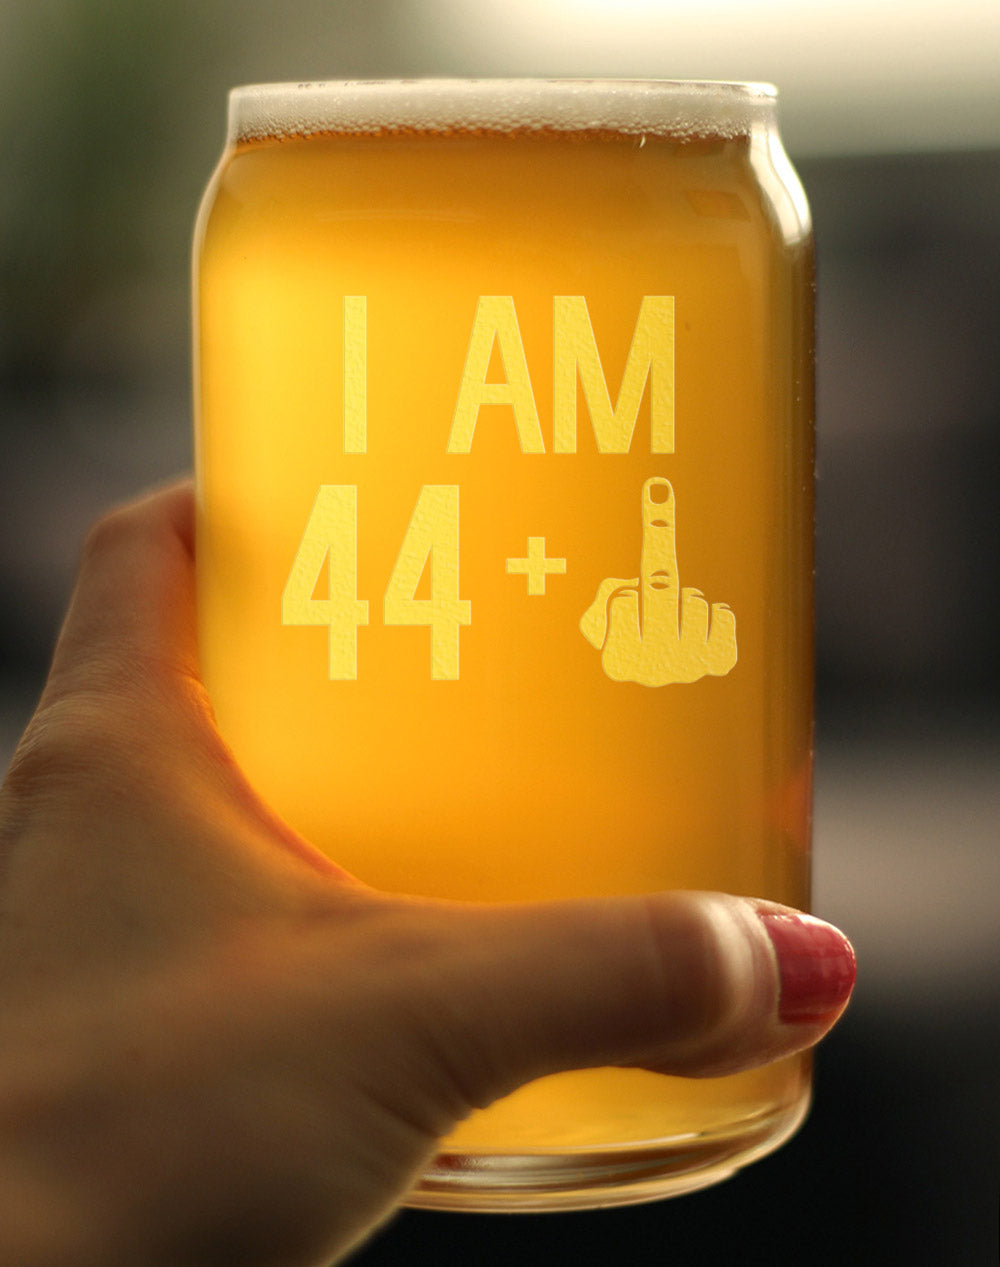 44 + 1 Middle Finger - 16 Ounce Beer Can Pint Glass